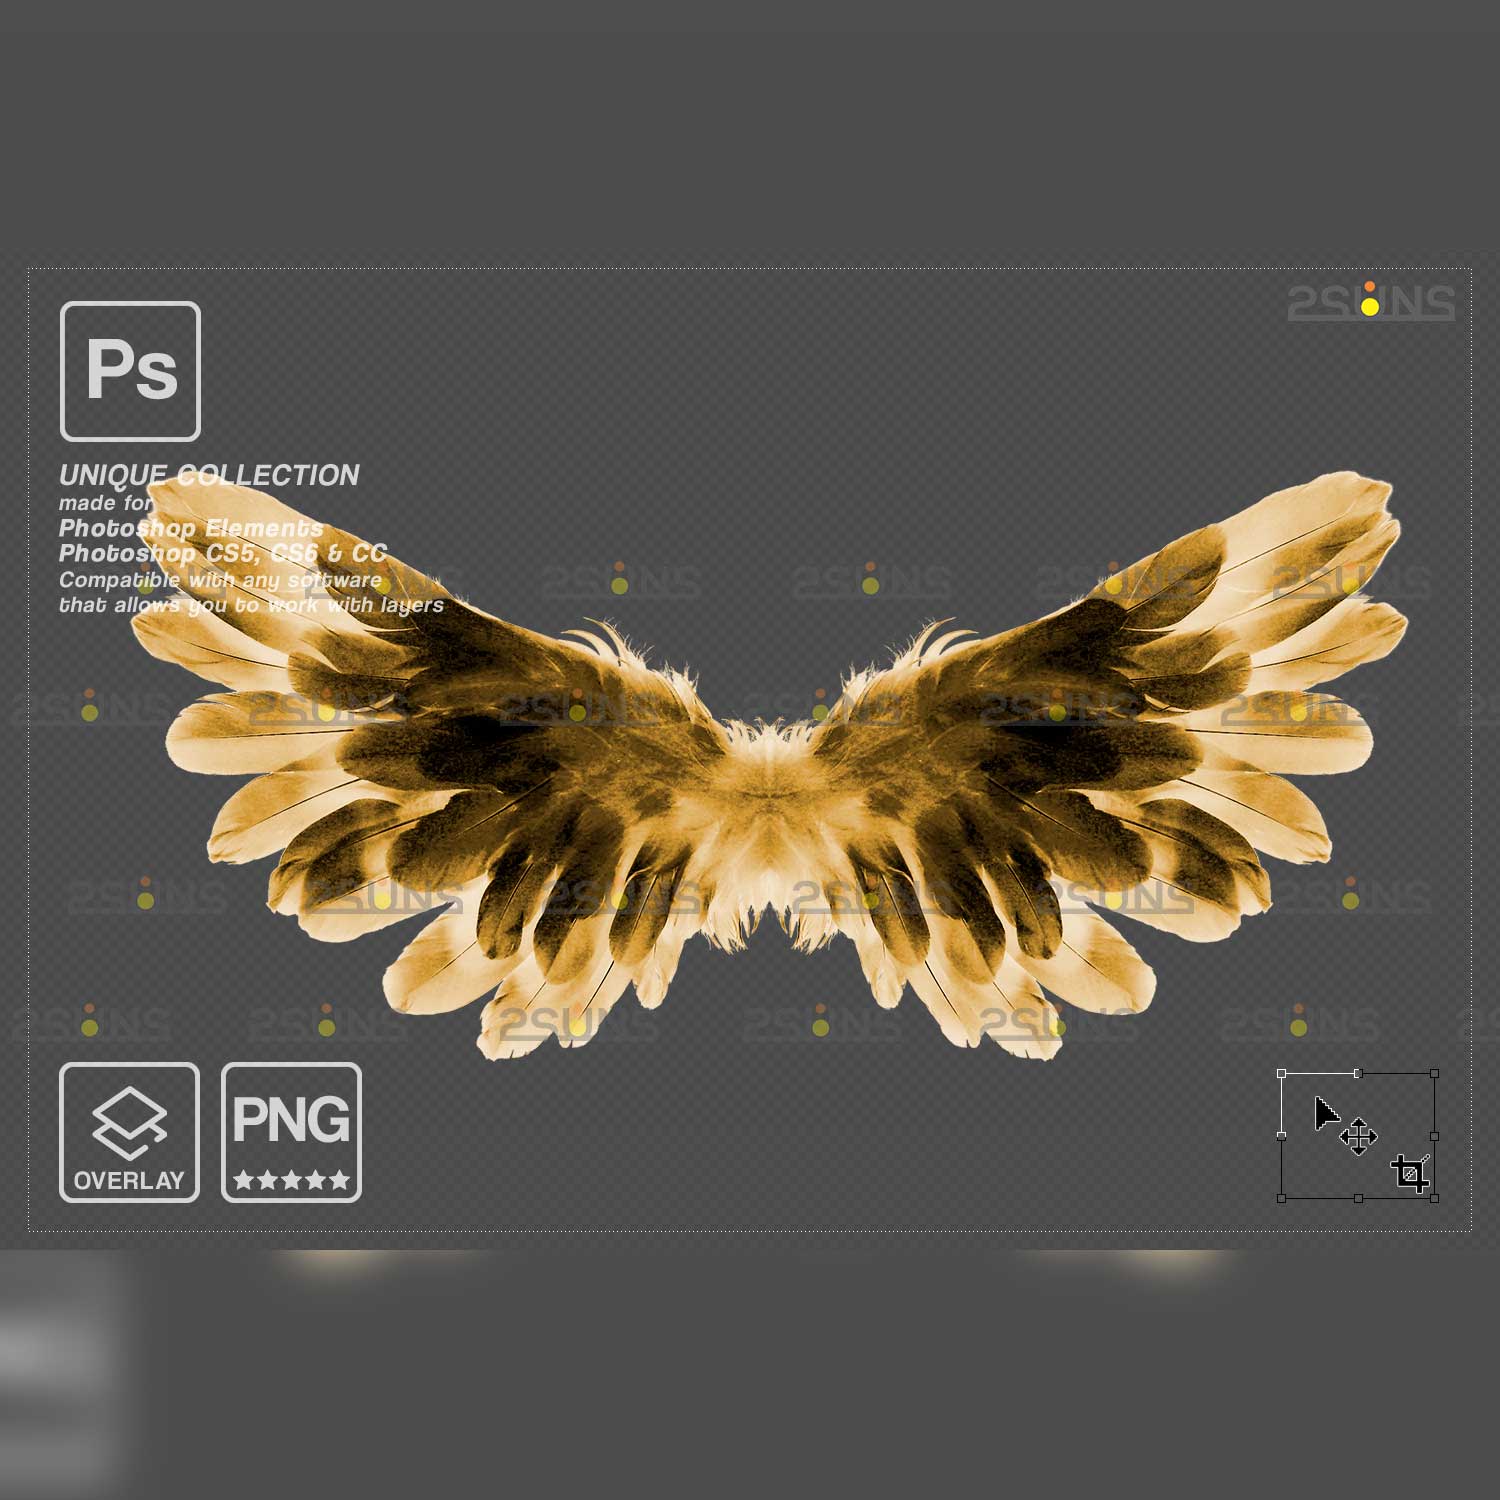 Realistic Black White Gold Angel Wings Photoshop Overlays two golden wings.